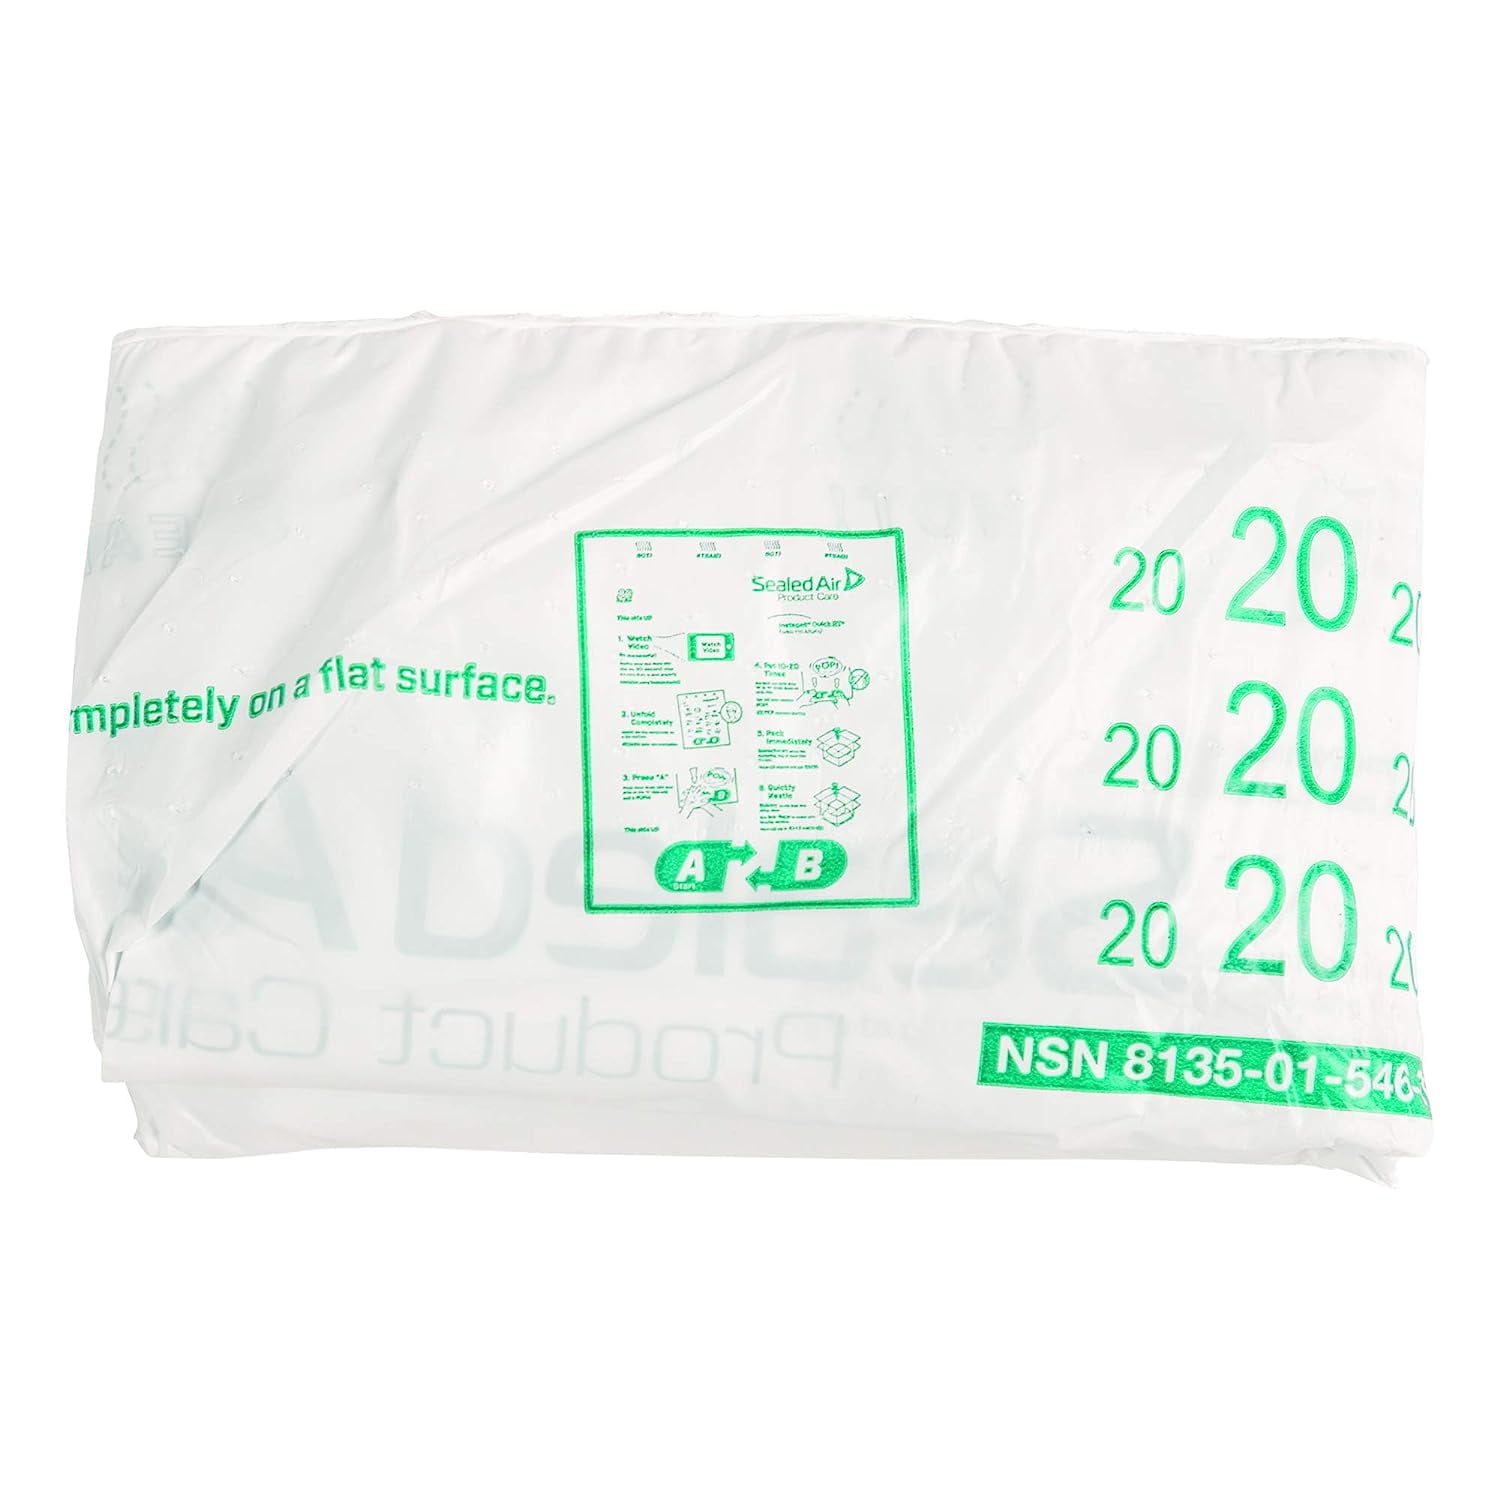 Sealed Air Instapak Quick RT #20 Heavy Duty Expandable Foam Bag, for  10″x10″x10″ Box, Pack of 36 – EmmPac Packaging